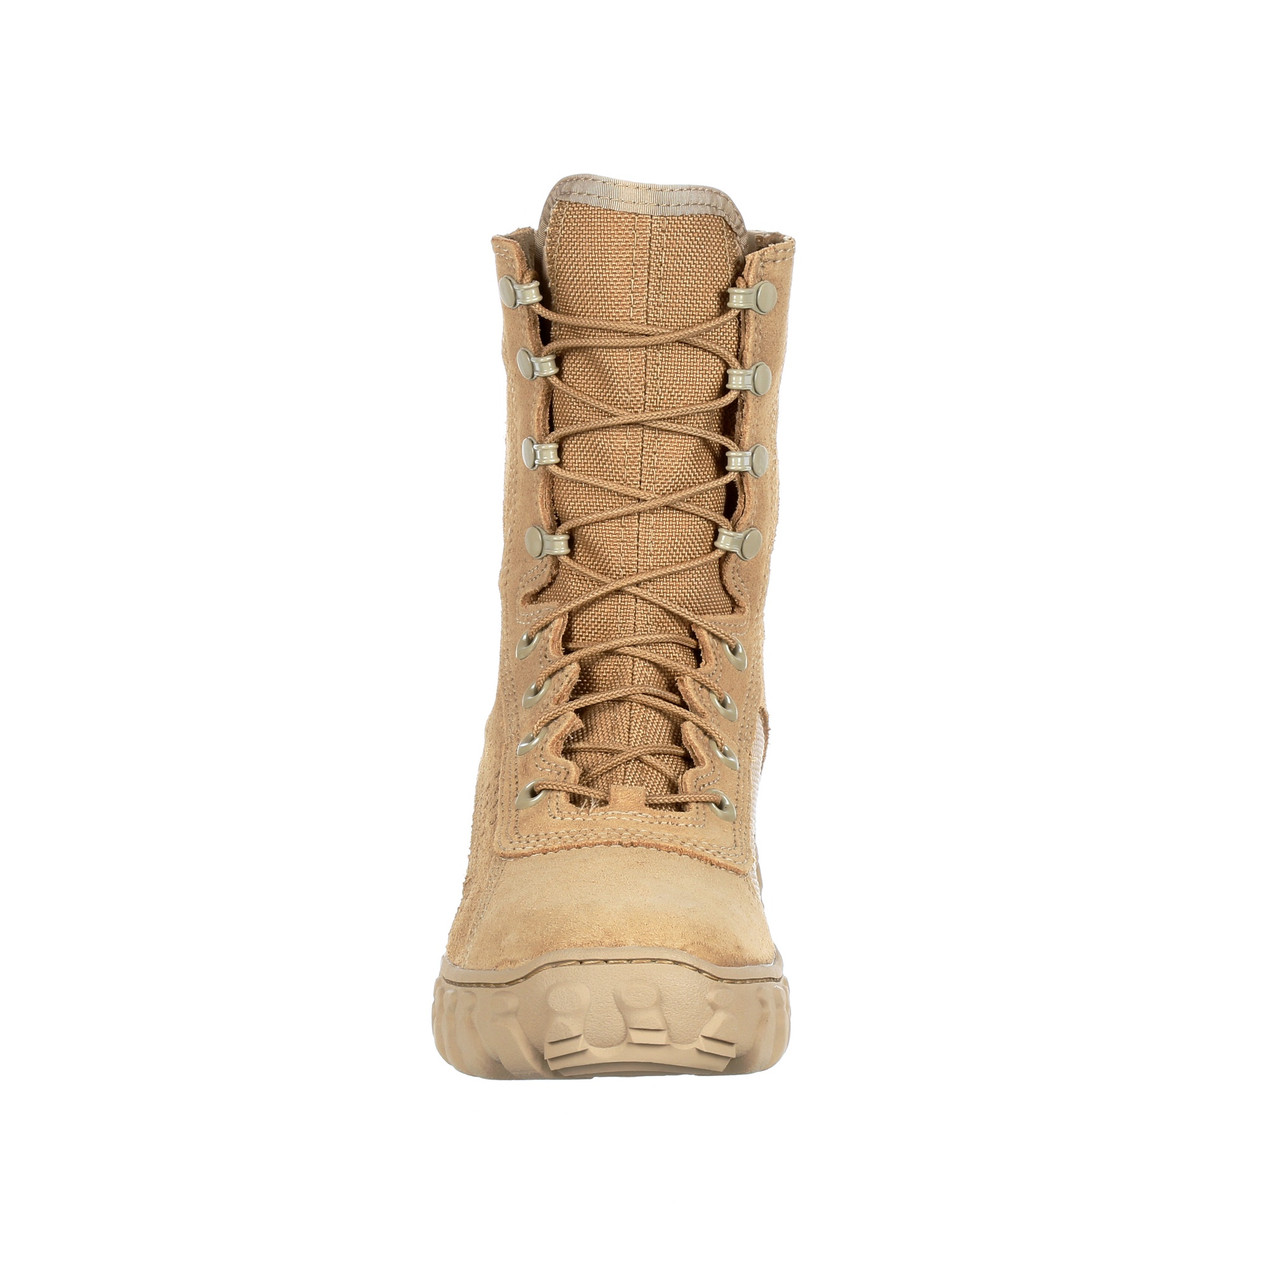 ROCKY S2V TACTICAL MILITARY BOOTS FQ0000101 SALE